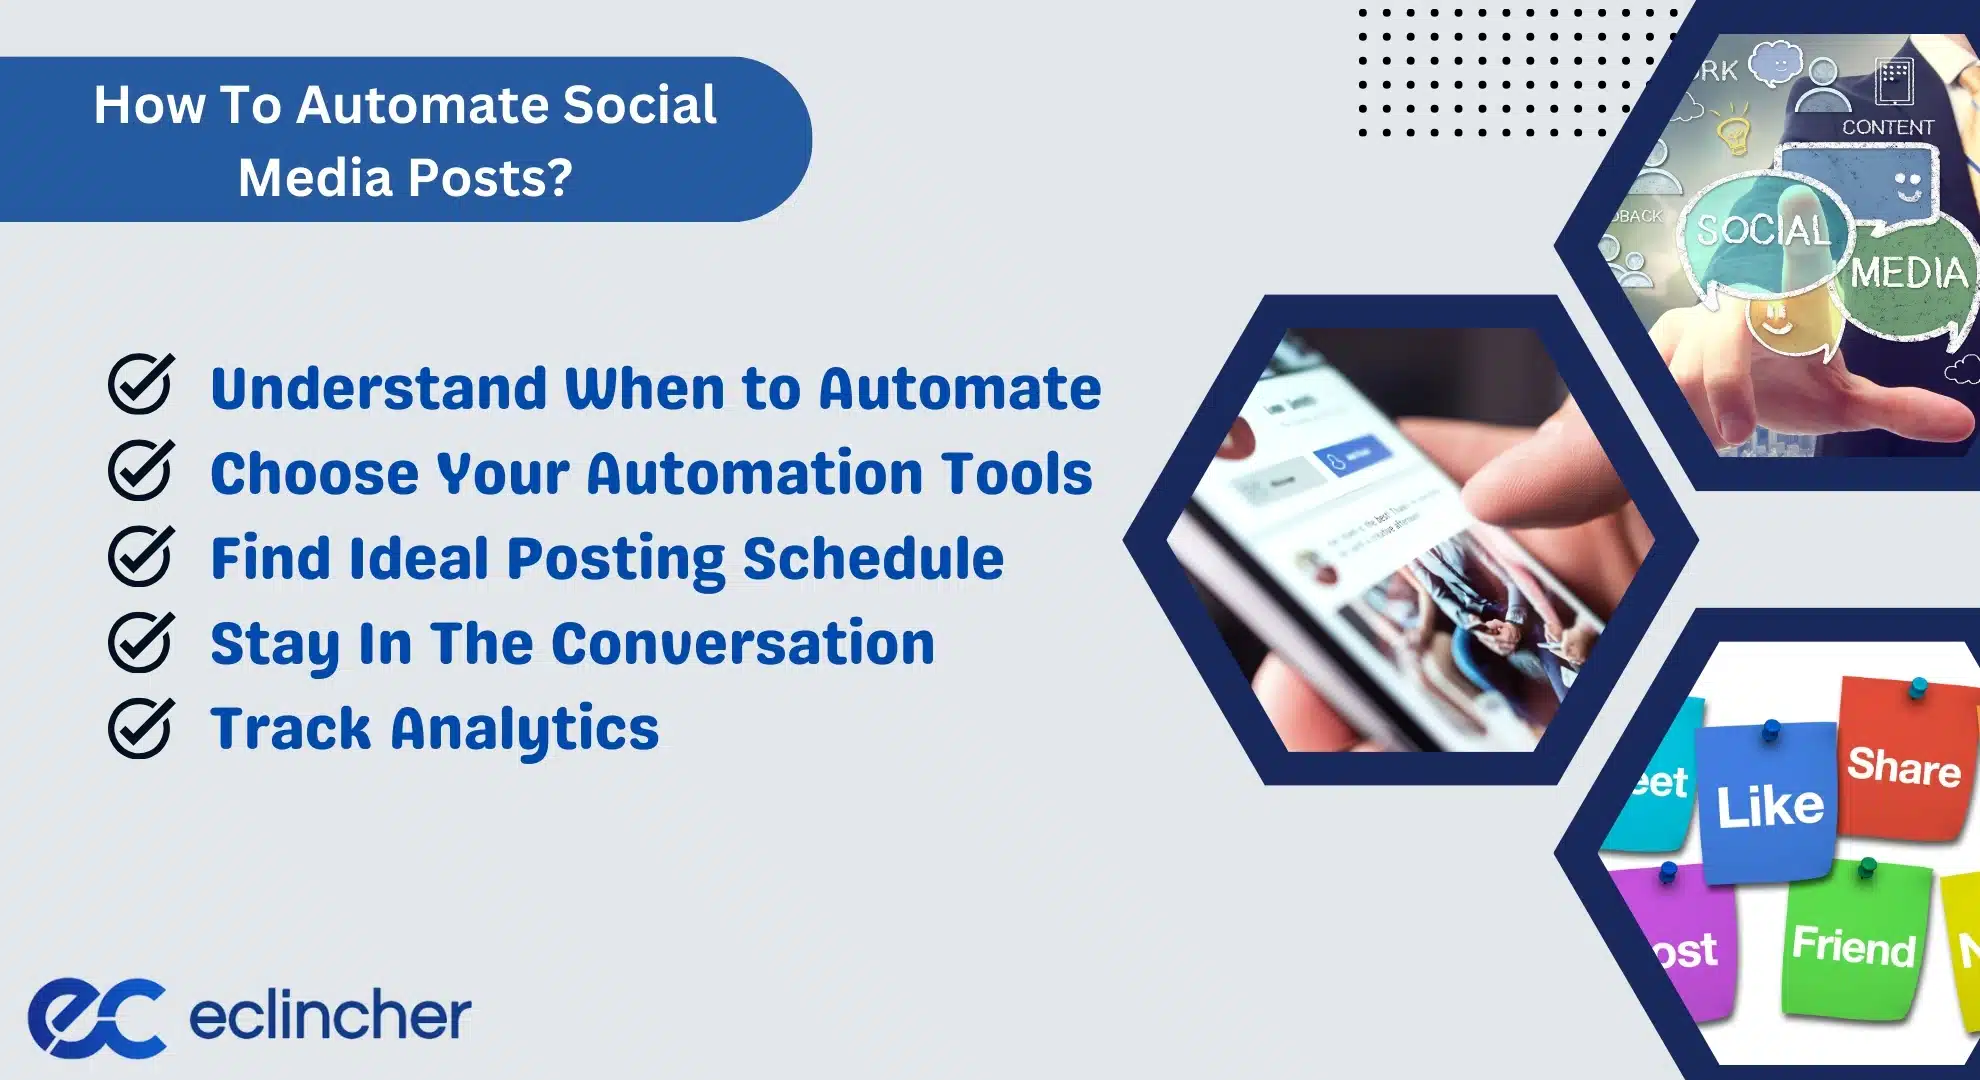 How To Automate Social Media Posts